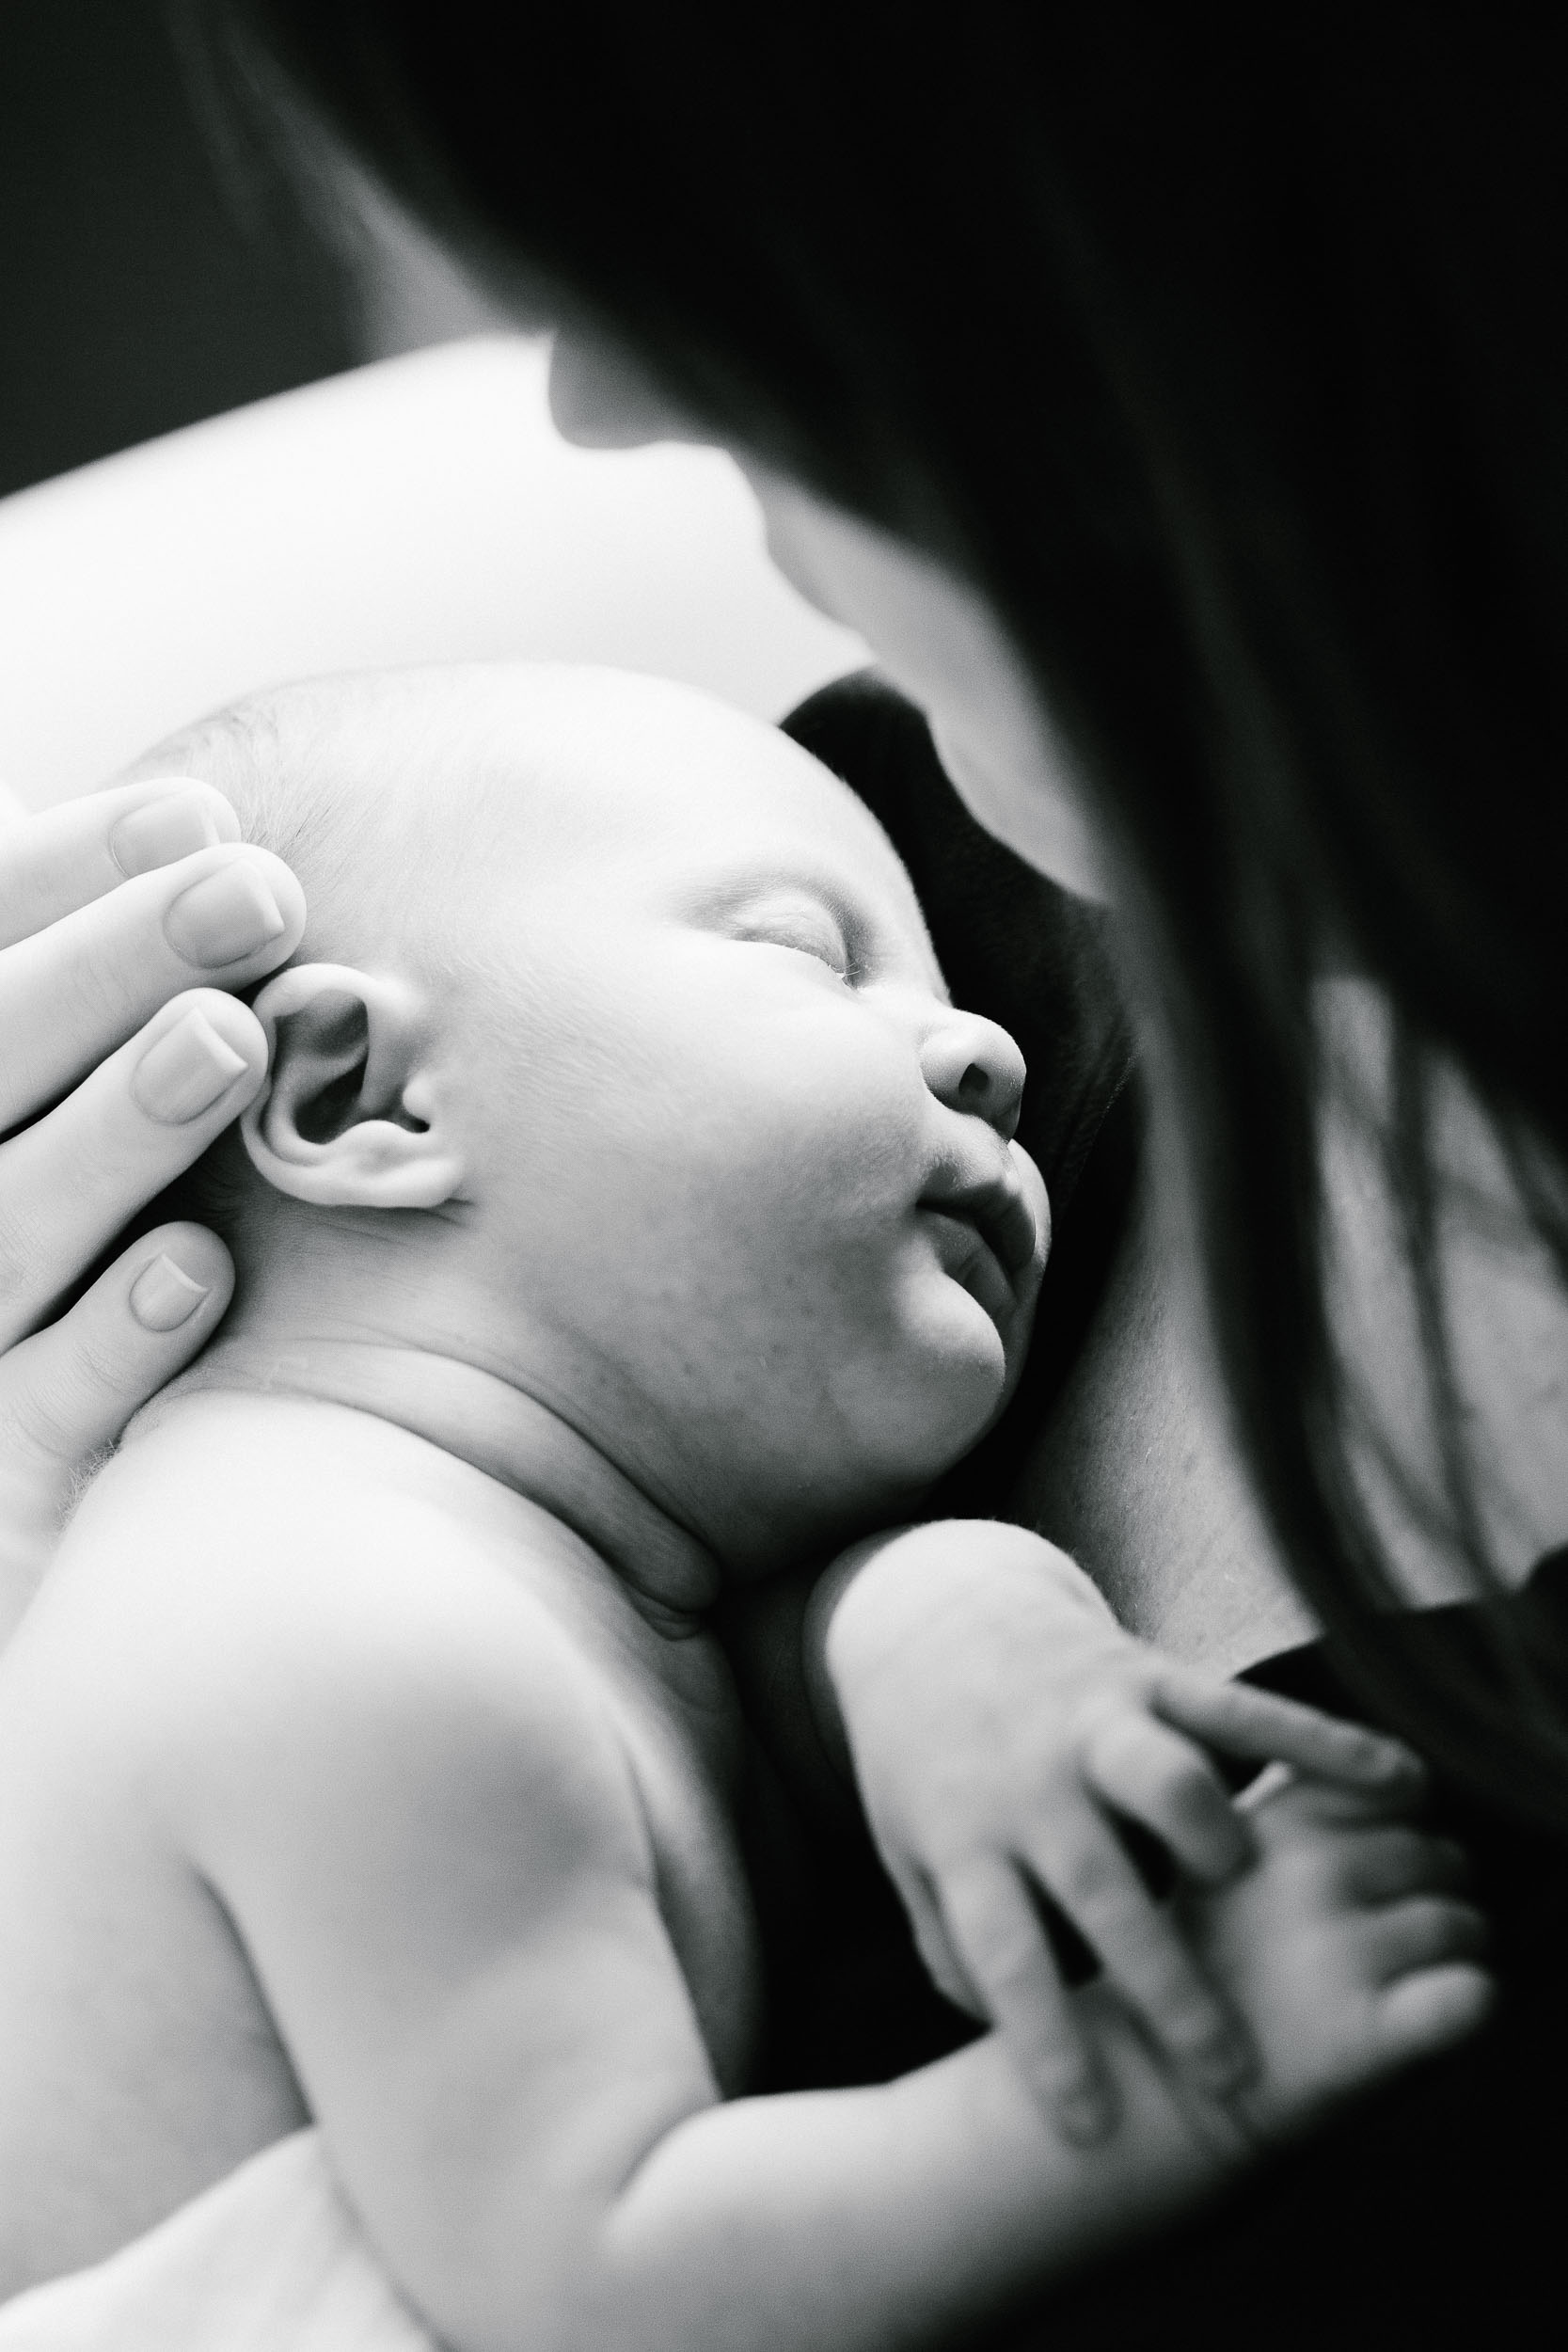 A tender moment between mother and baby | Story of the photo | Lausanne